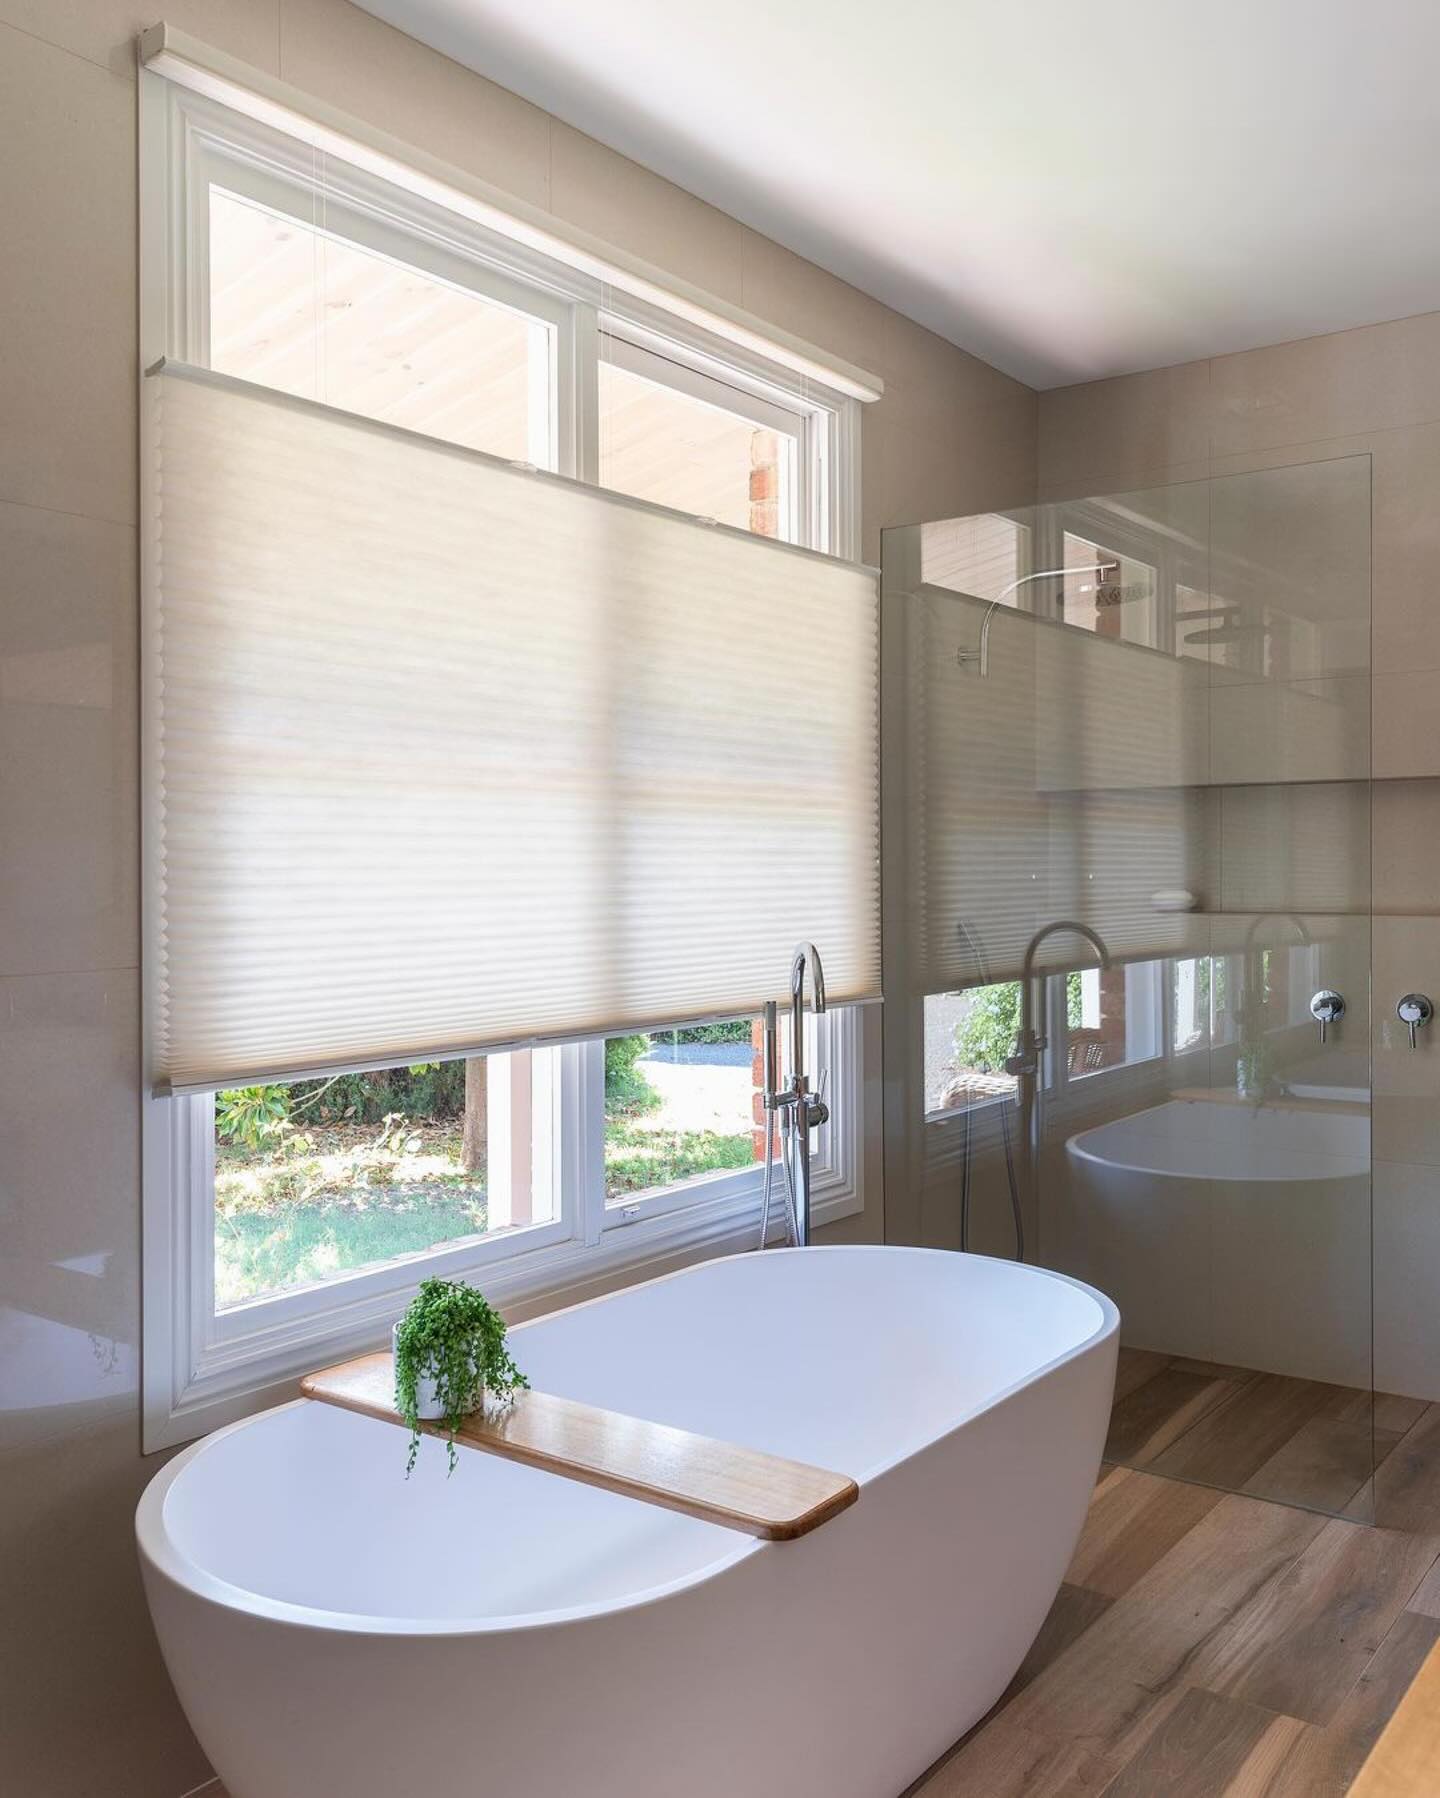 Elegant modern bathroom showcasing EaseEaseCurtains eco-friendly top-down bottom-up honeycomb shades in a serene setting with wooden flooring and oval bathtub